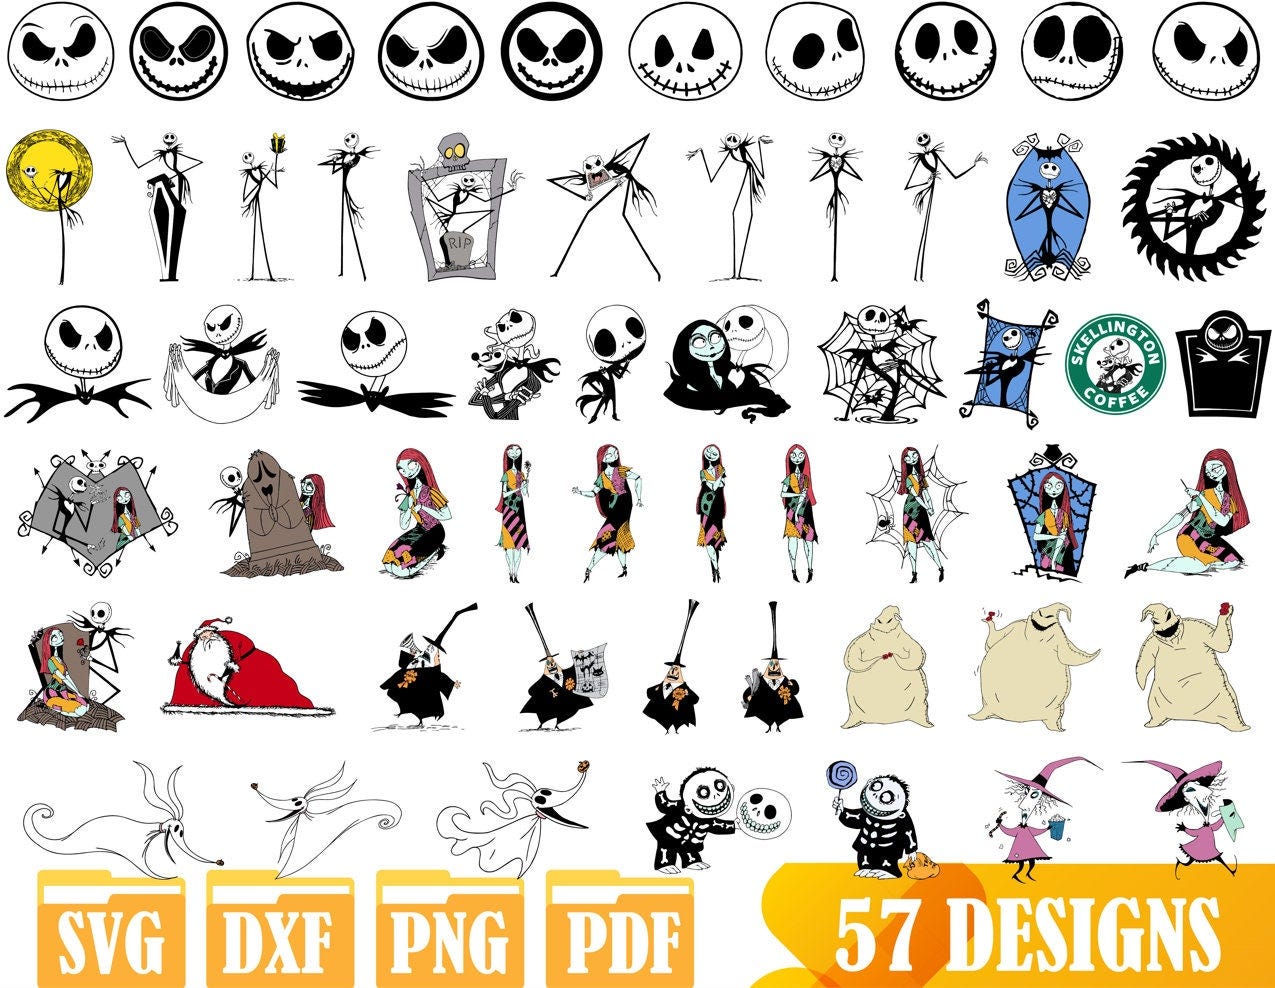 Easy to use 57 High quality designs (Layered SVG, DXF, PNG, pdf)